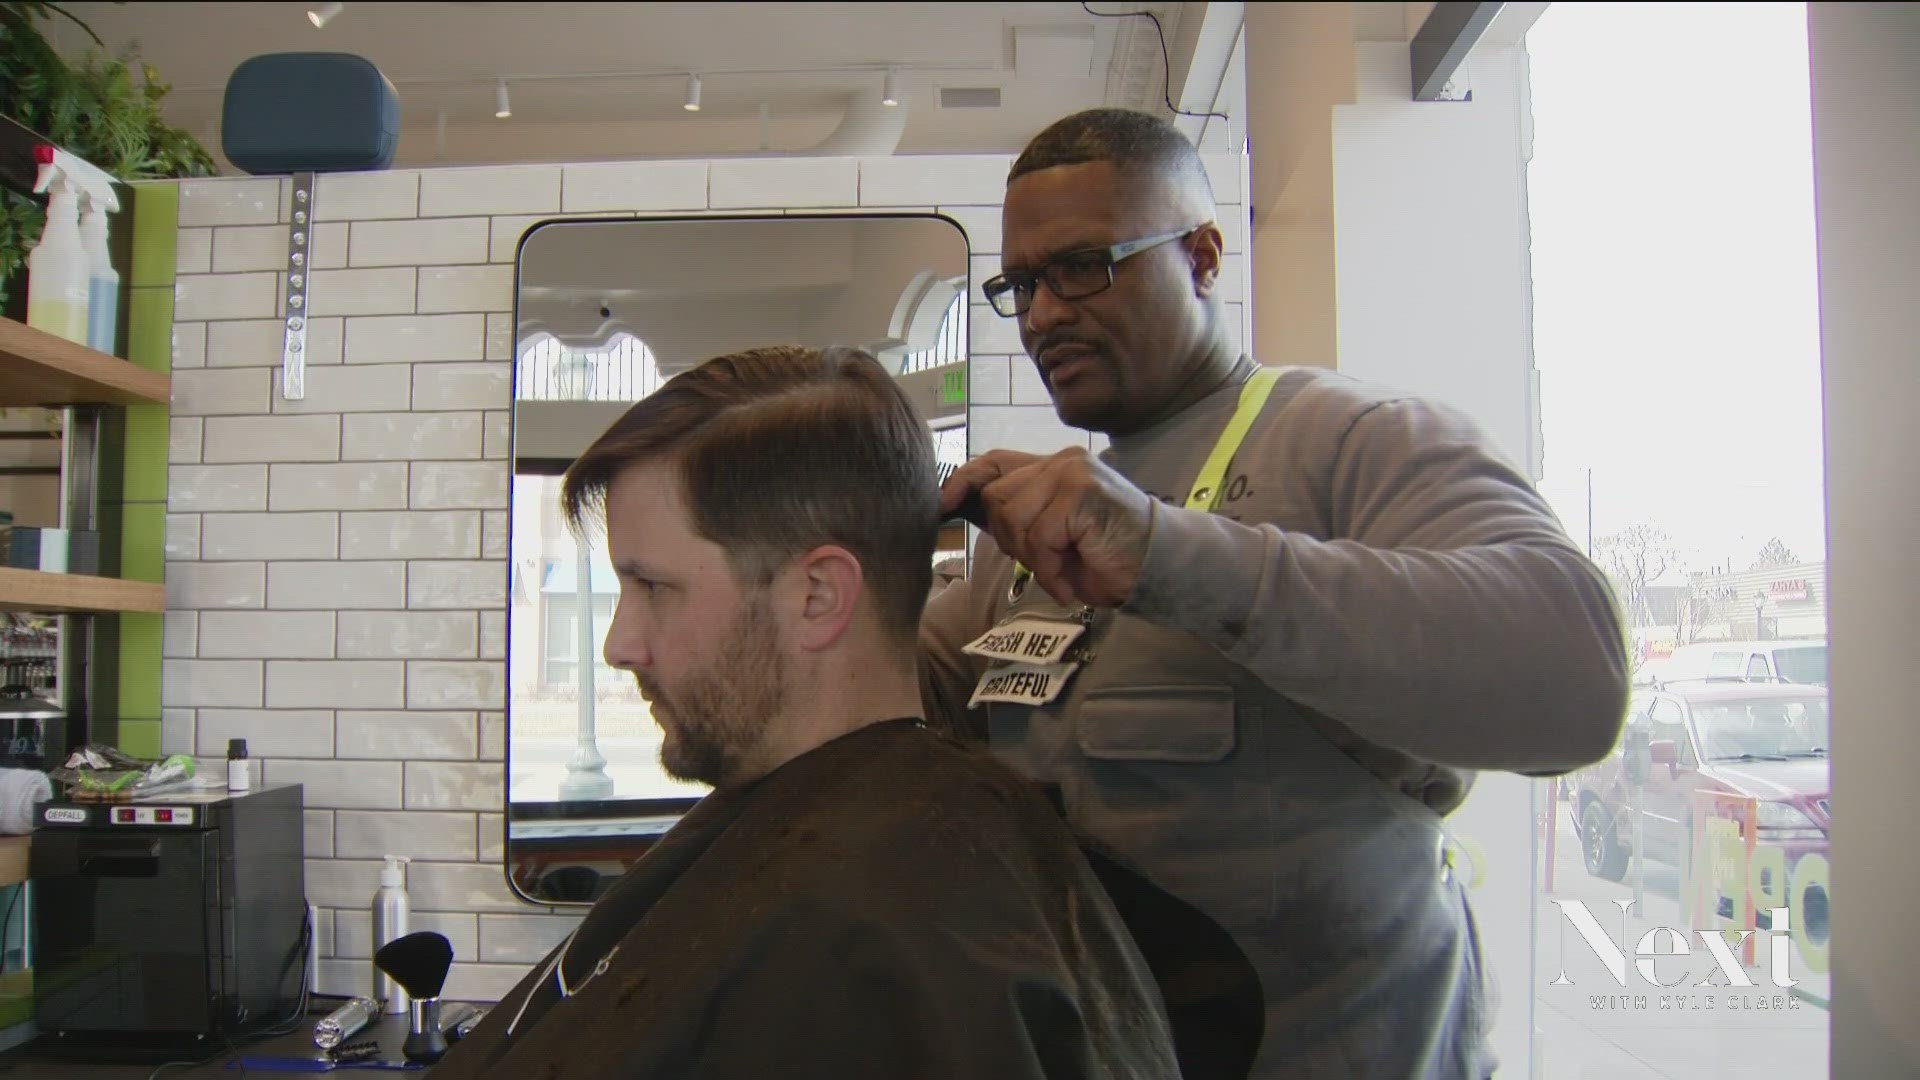 The barbershop is working with prisons to employ people immediately after release. They will offer training and apprenticeship so they can later earn a license.